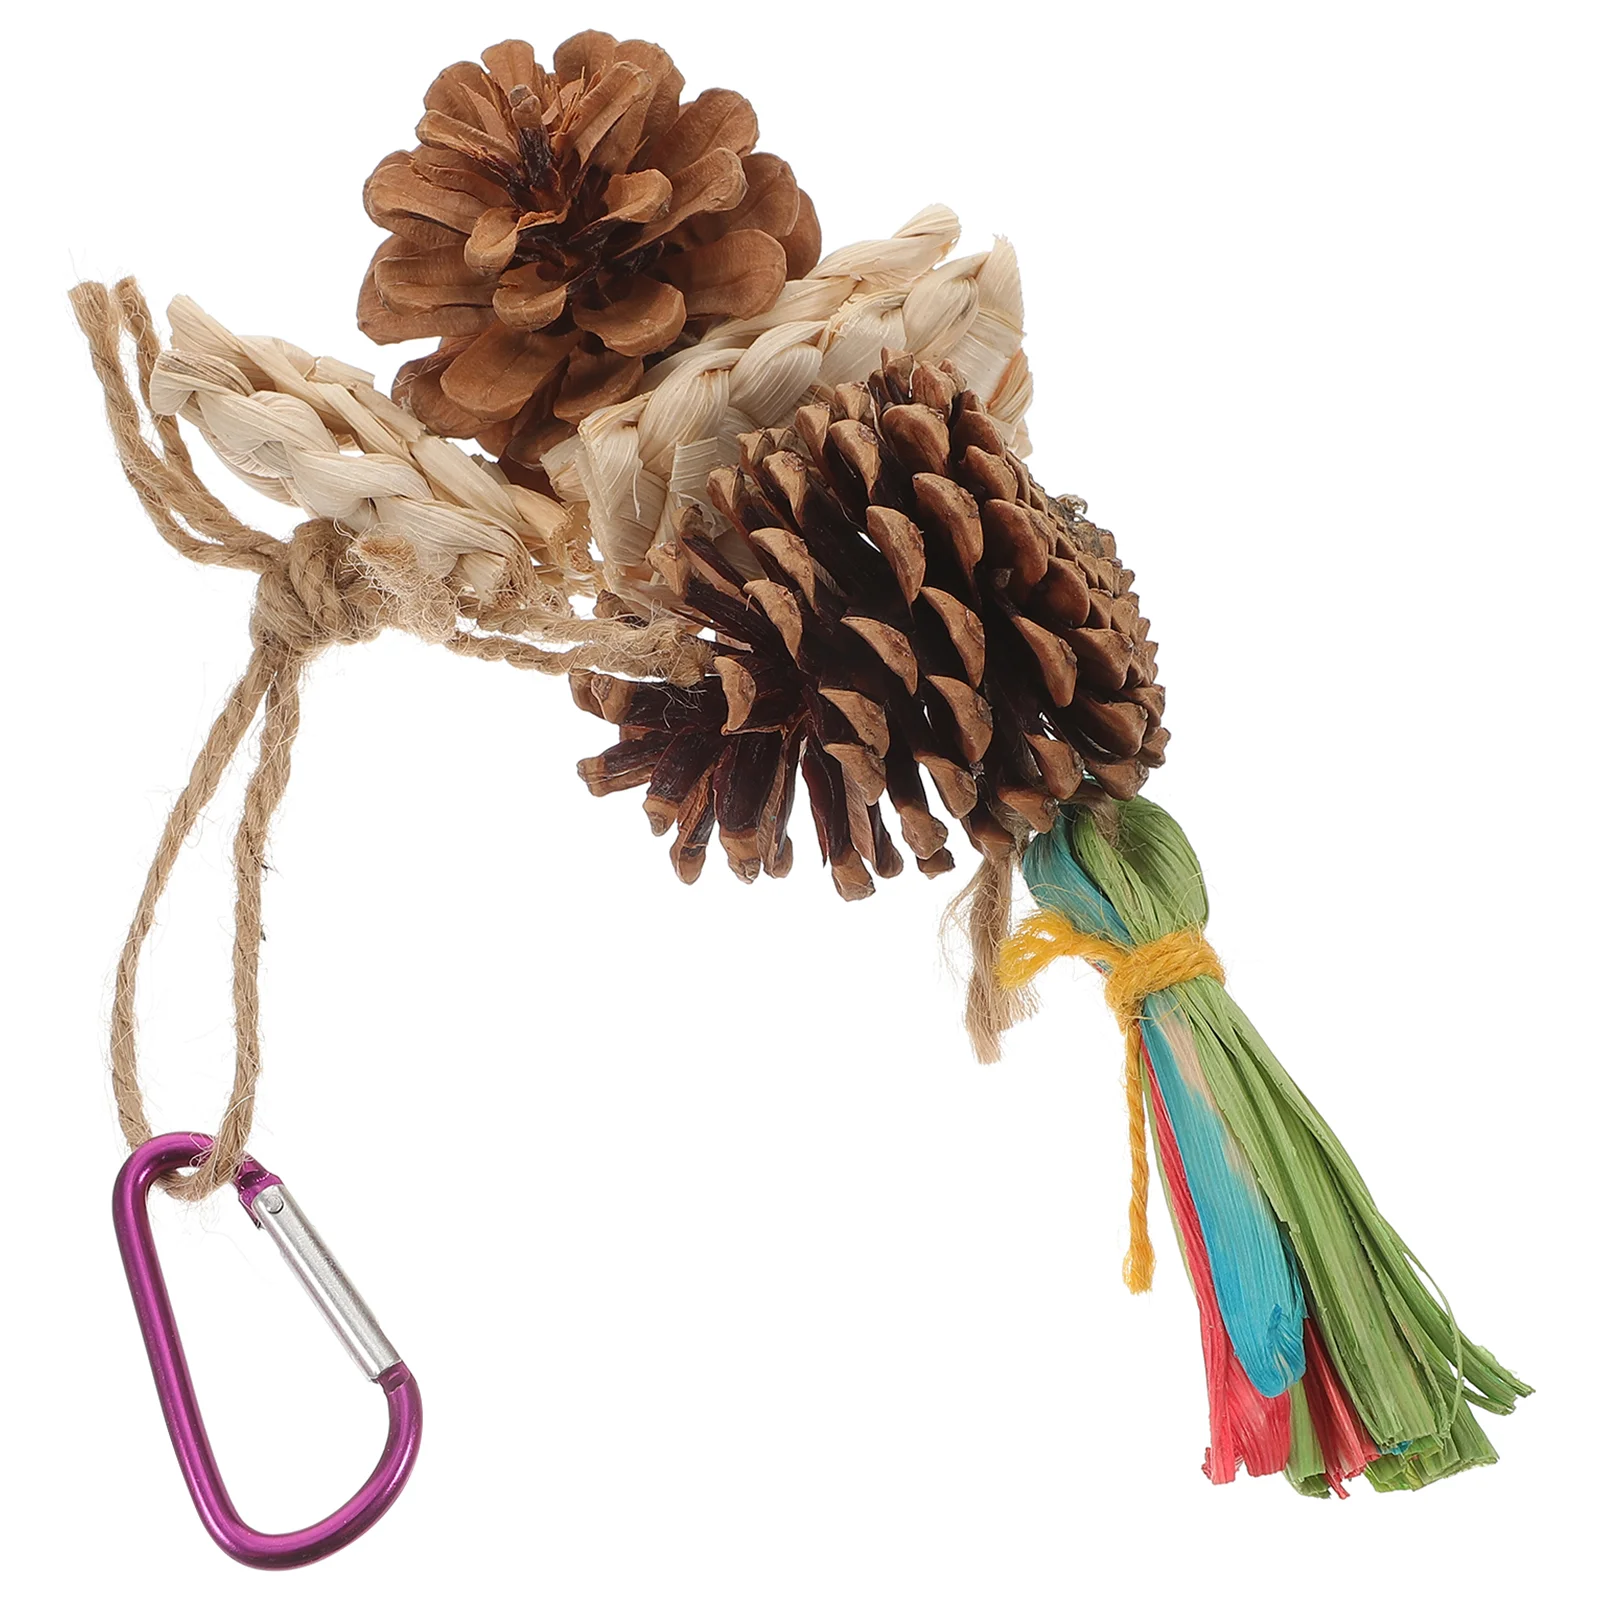 

Bird Chew Toy Parrot Hanging Bite Suspending Supplies Parakeet Cage Tiger Skin Large Chewing Pine Cones Delicate